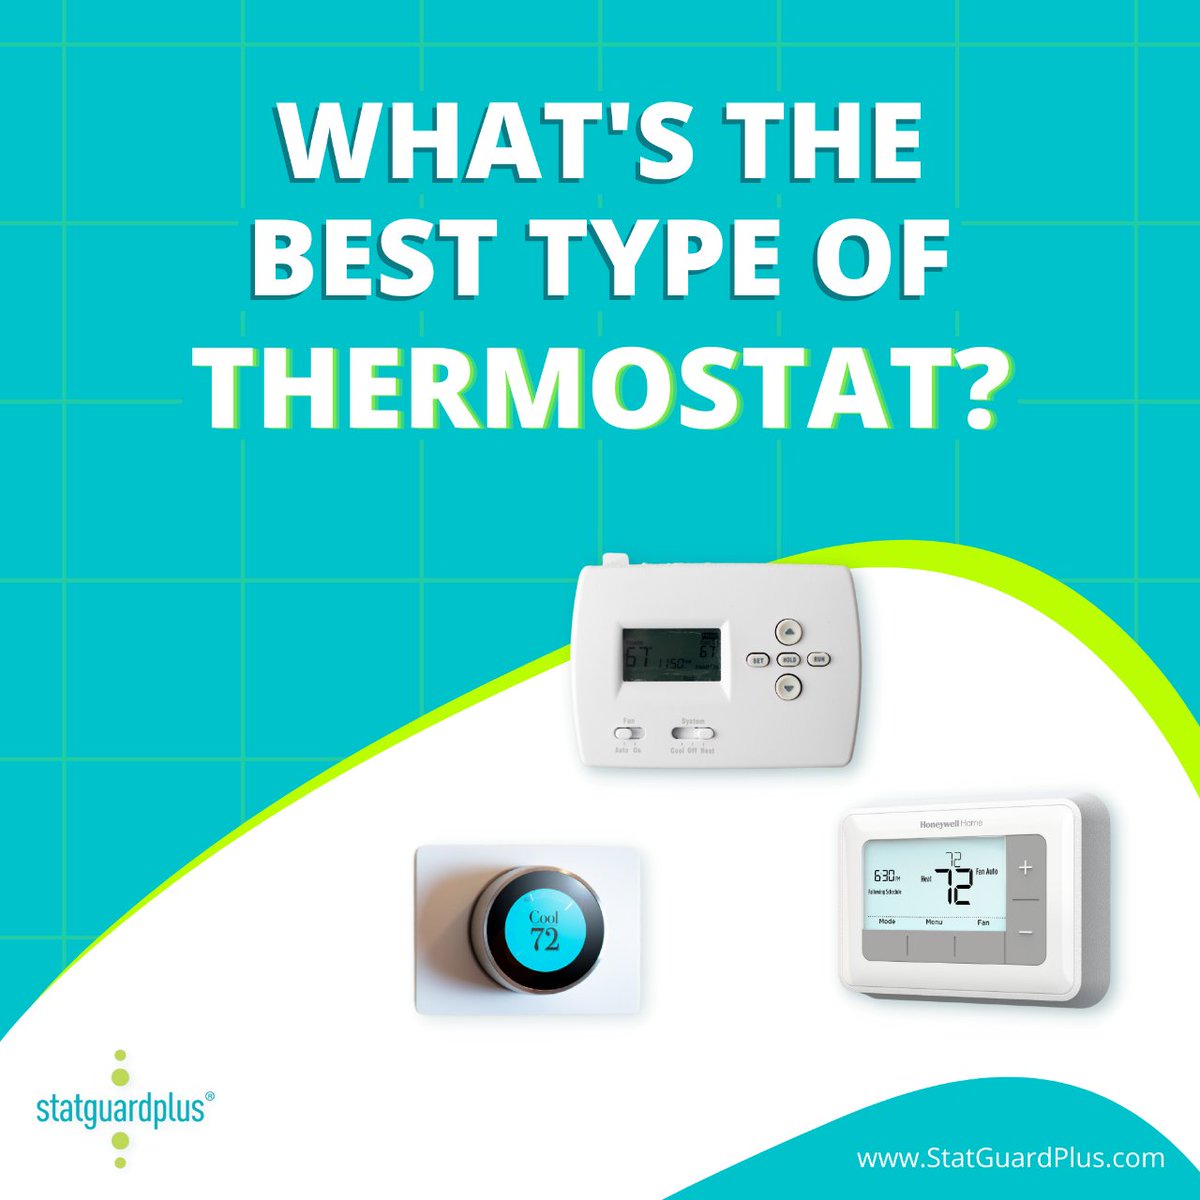 So, you're replacing your old thermostat or buying one for the first time, and you're wondering which type to choose?

Hopefully, this post will help you.

[Read more in the thread]

#SmallBusiness #RetailStore #HVACTips #Home #Thermostat #ThermostatTips #AirConditioning #USA